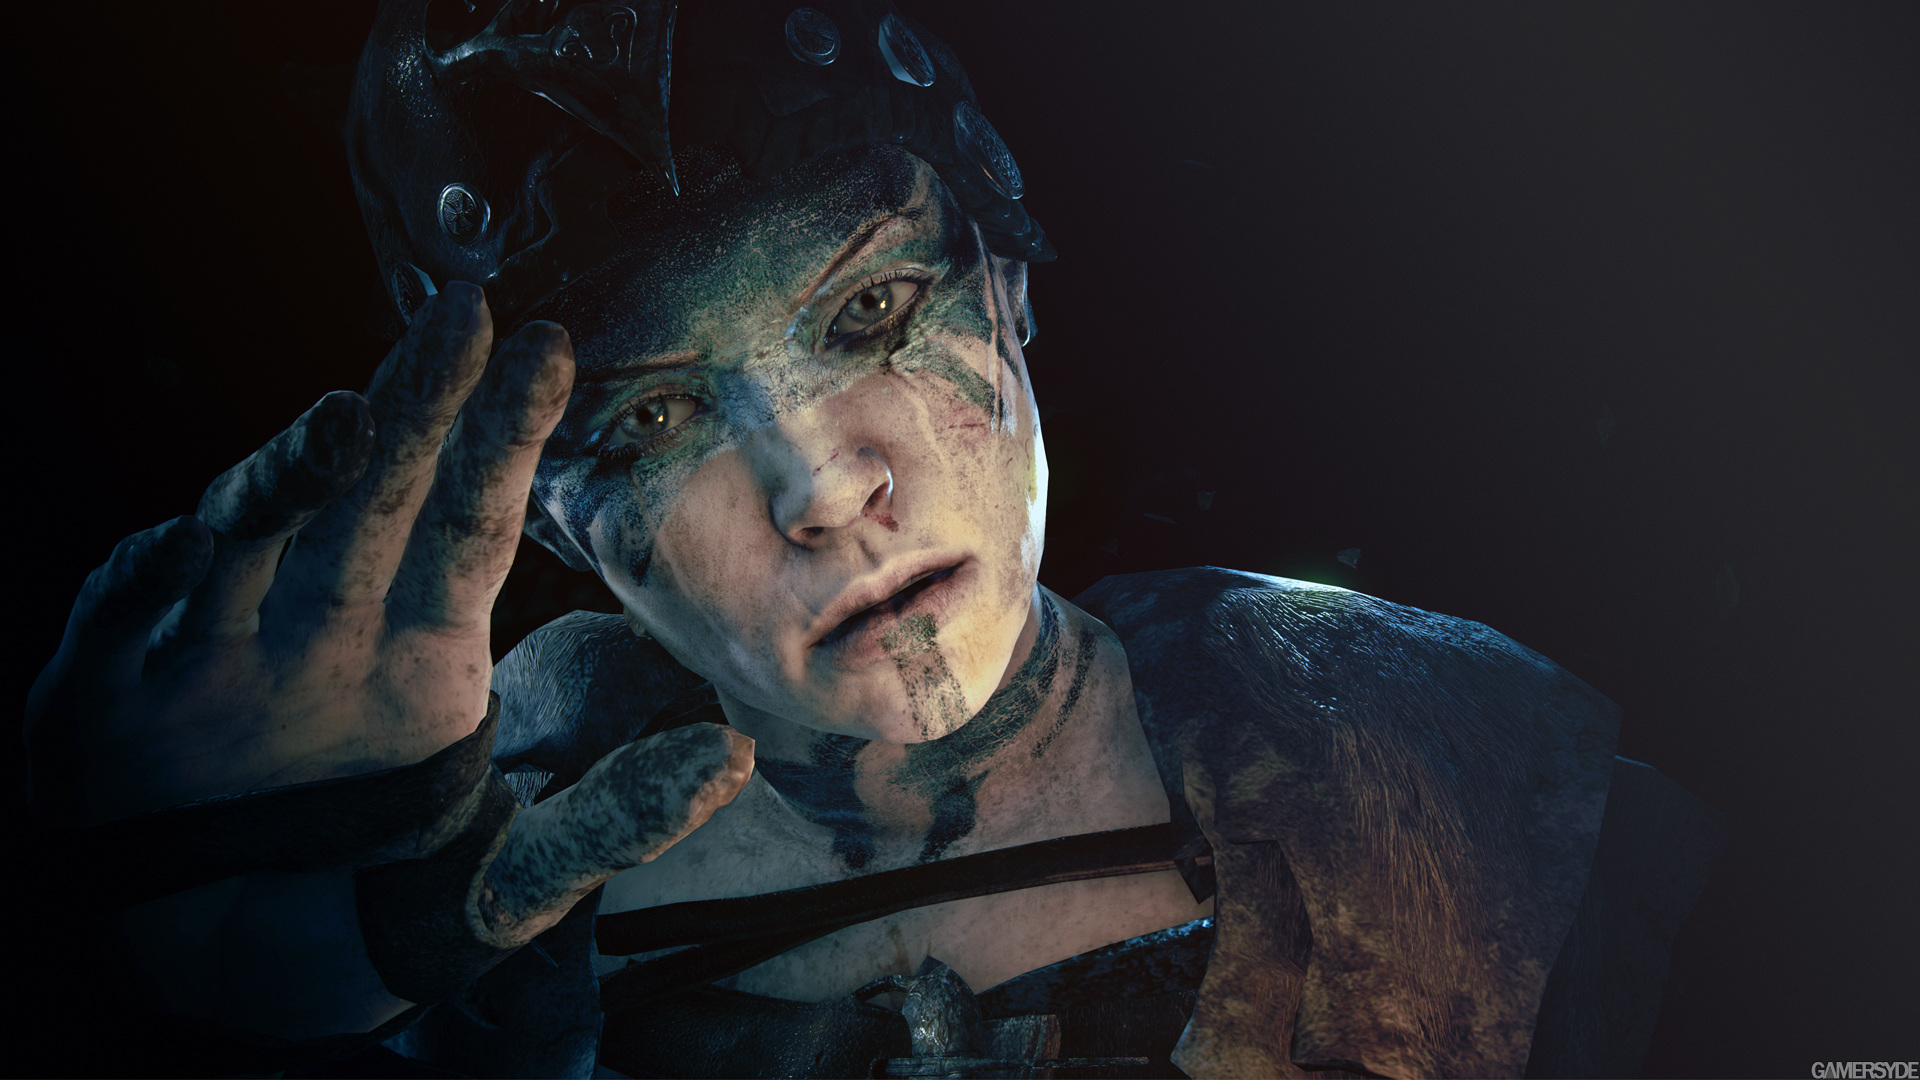 Ninja Theory dropped the most metal trailer of the year for Hellblade II